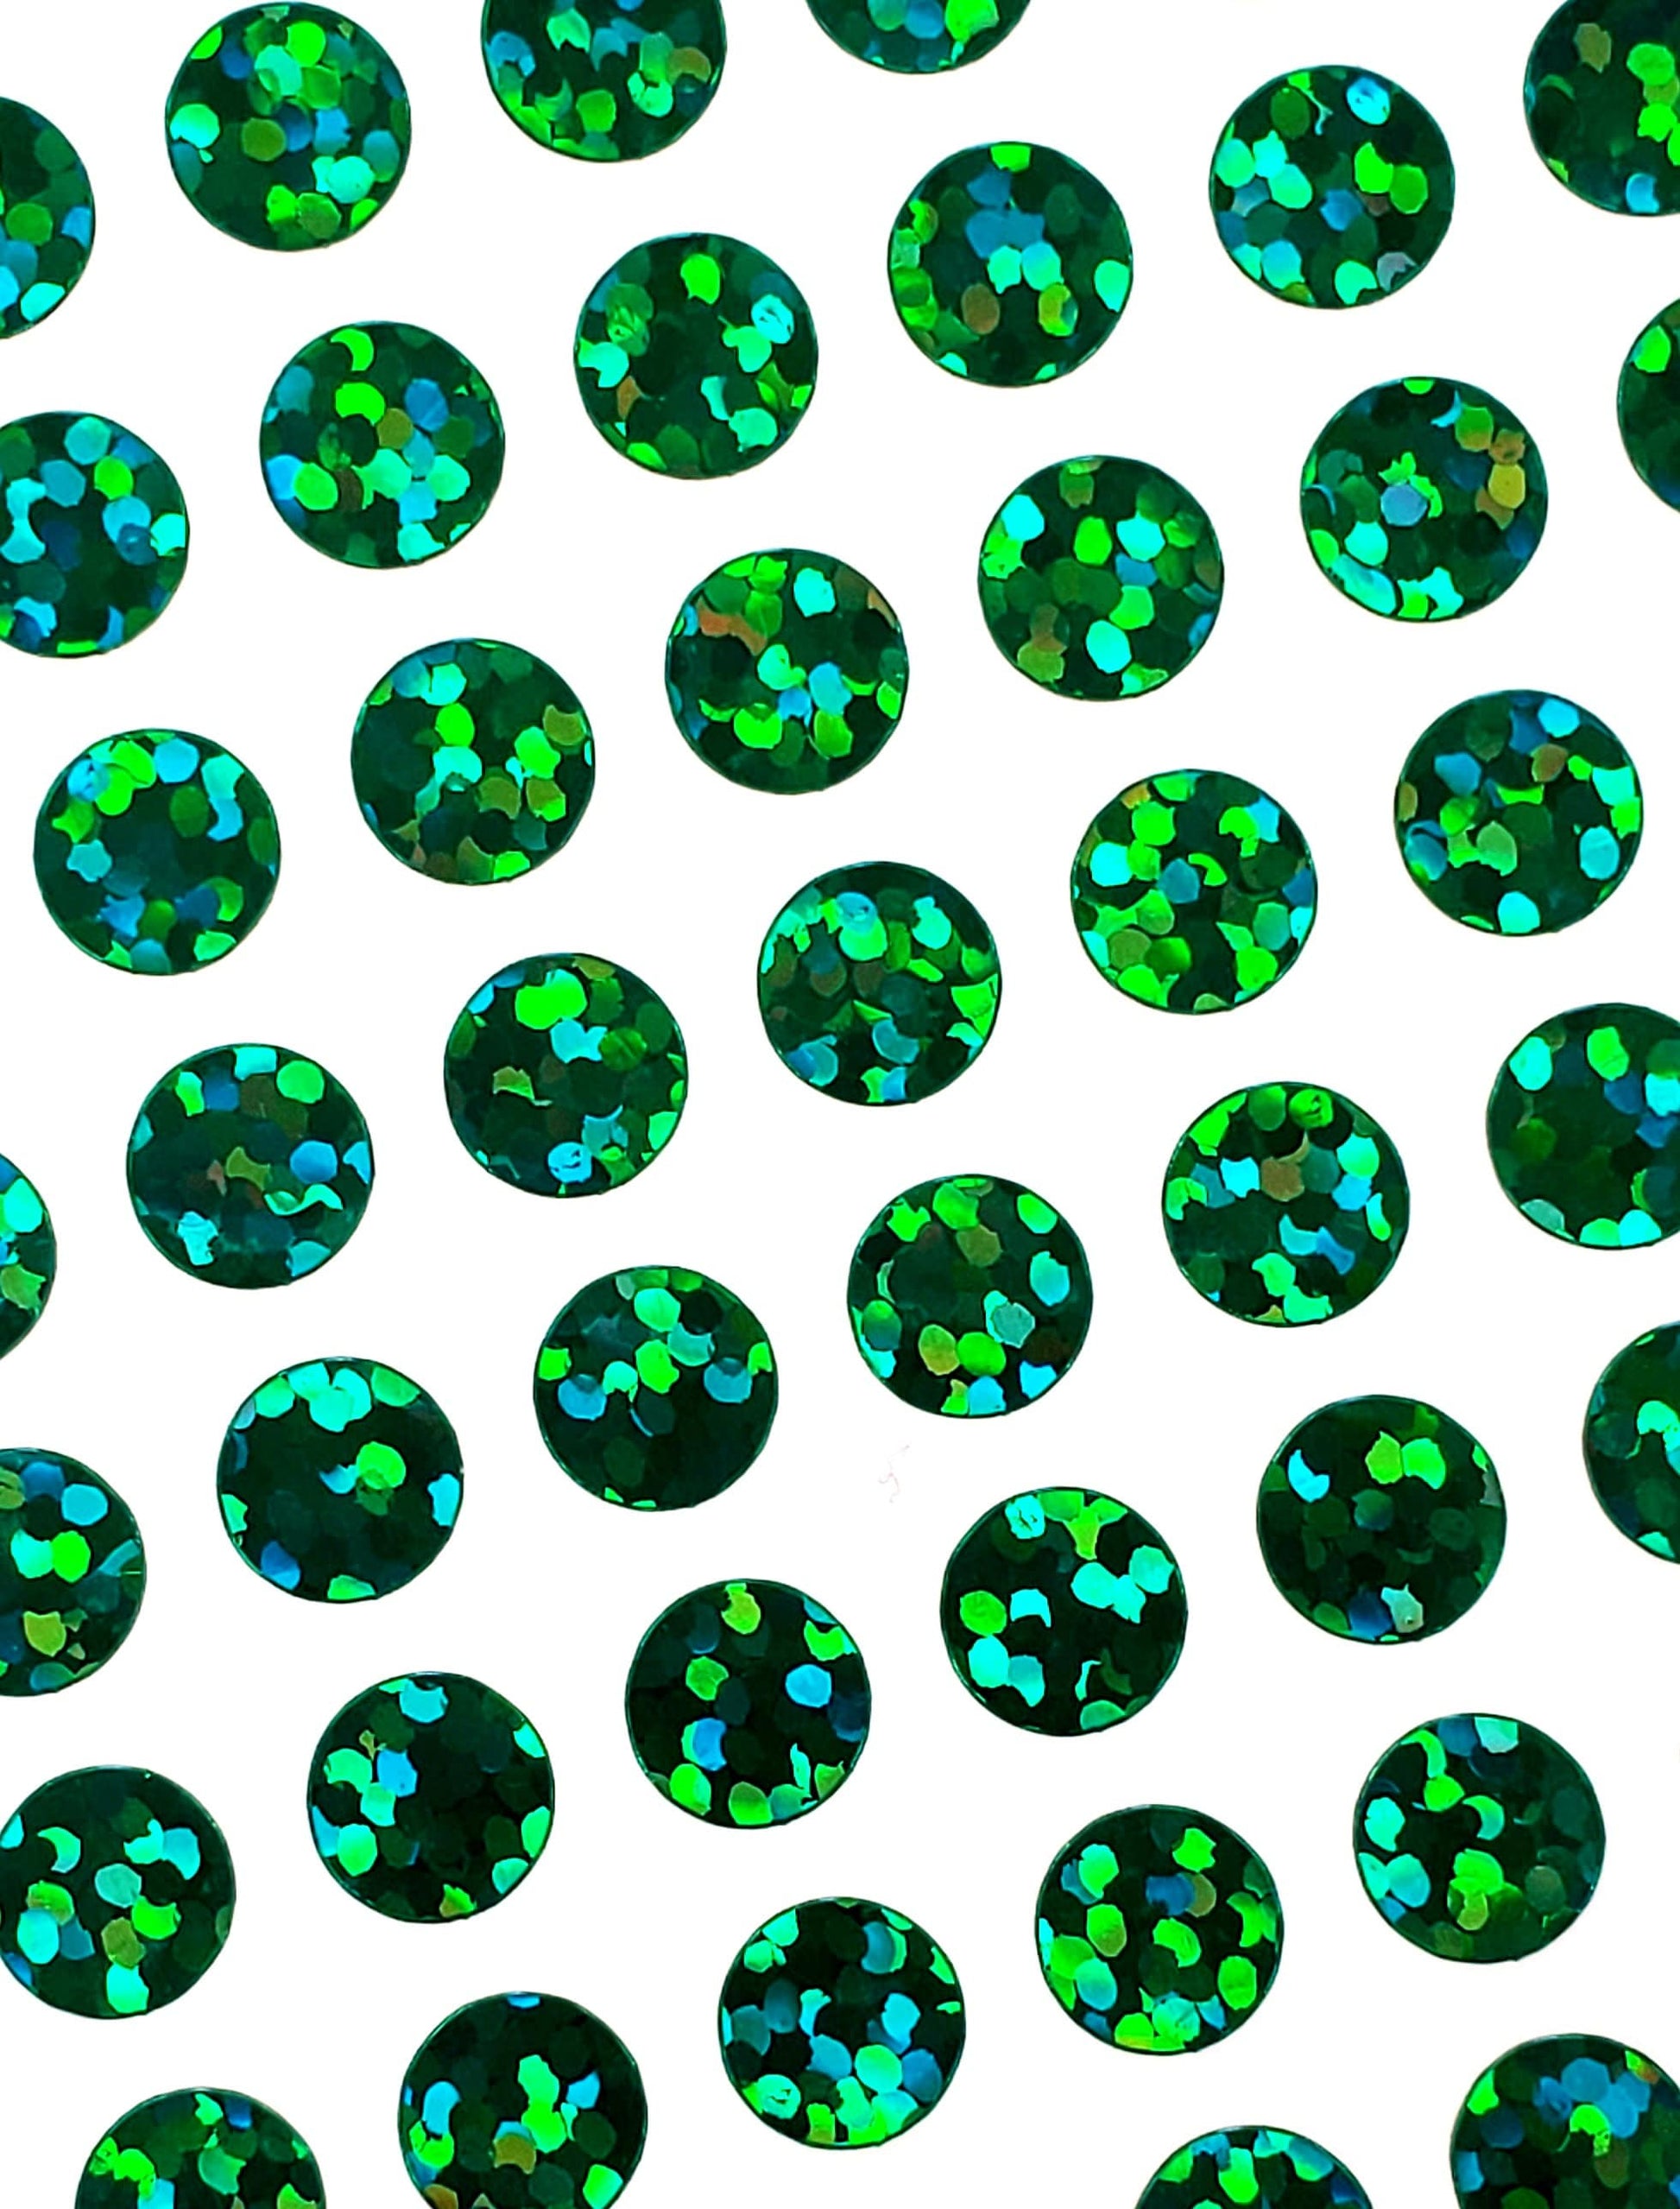 Small Green Dot Sticker Sheet, set of 368 sparkly dots, vinyl stickers for journals, ornaments and crafts. One quarter inch dark green dots.